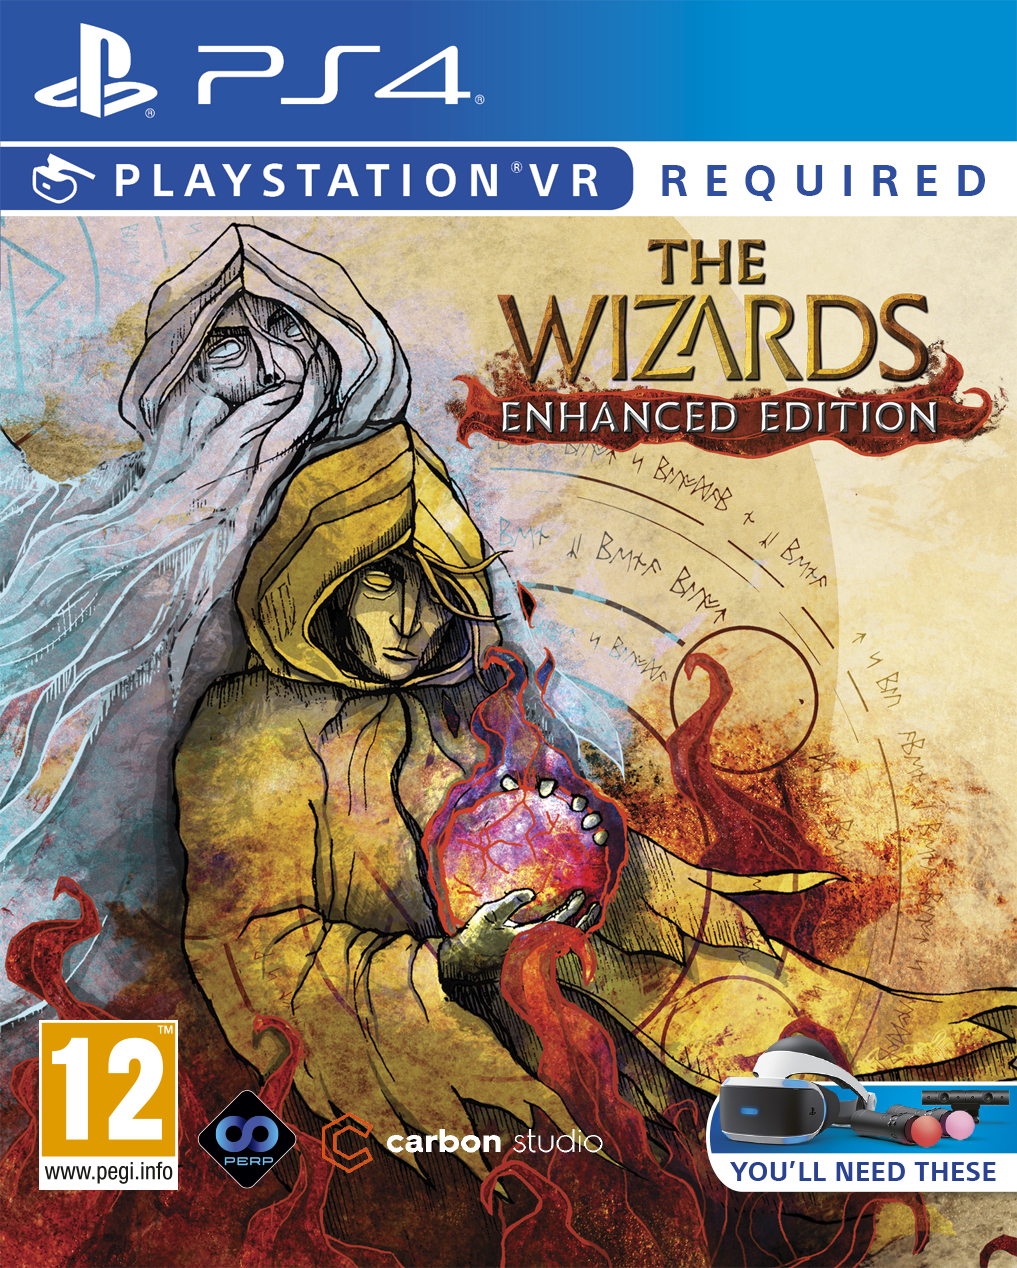 The Wizards Enhanced Edition